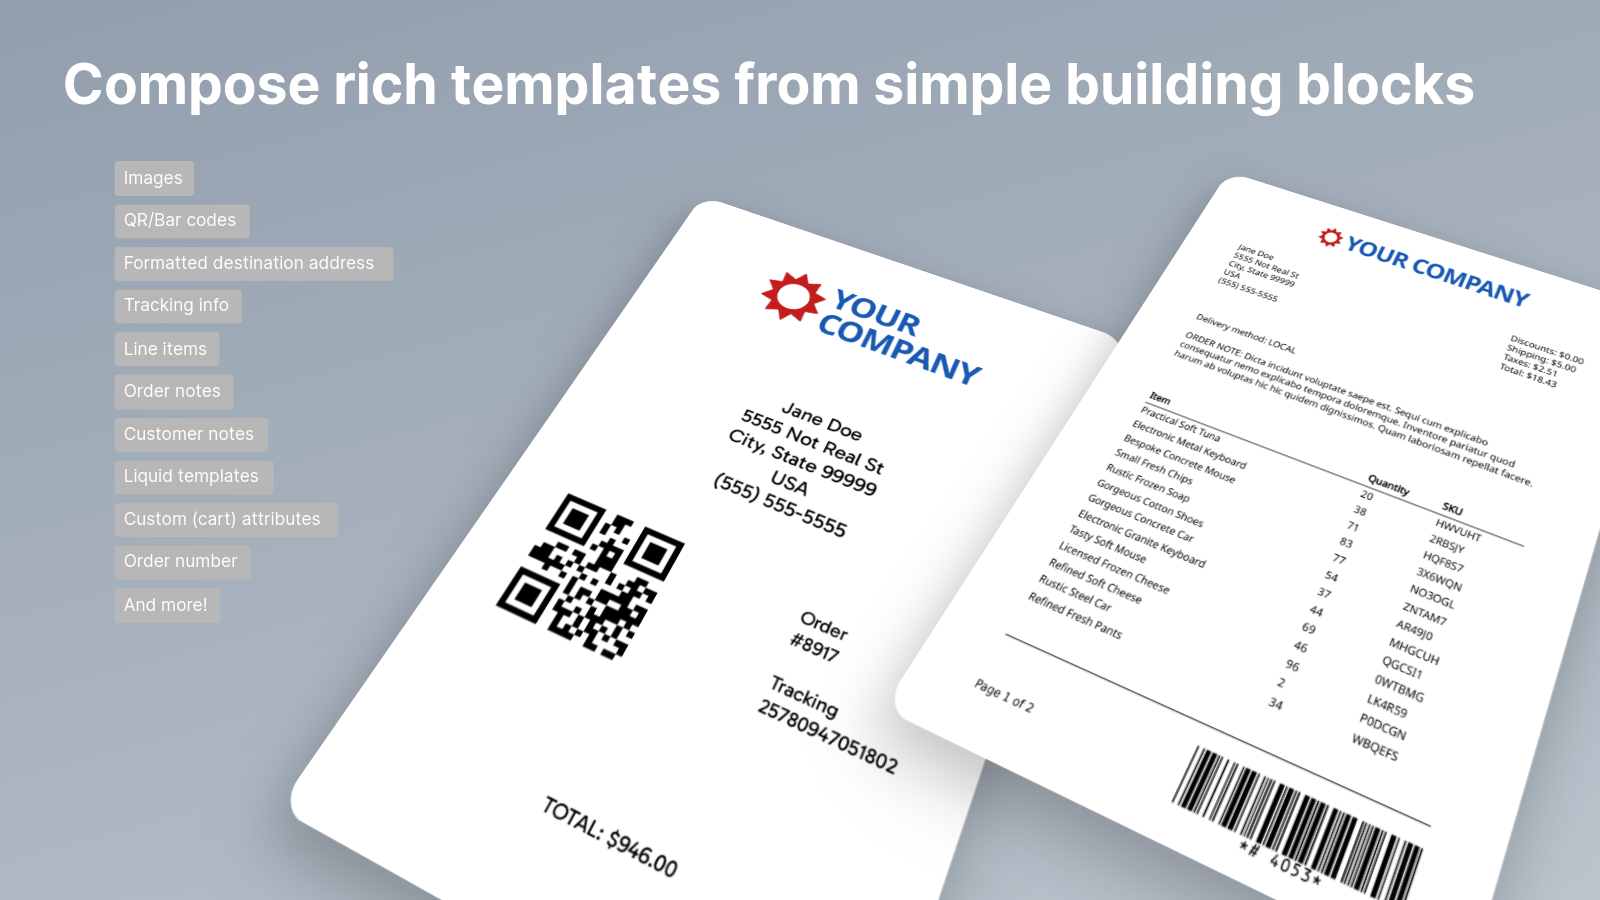 Compose rich templates from simple building blocks